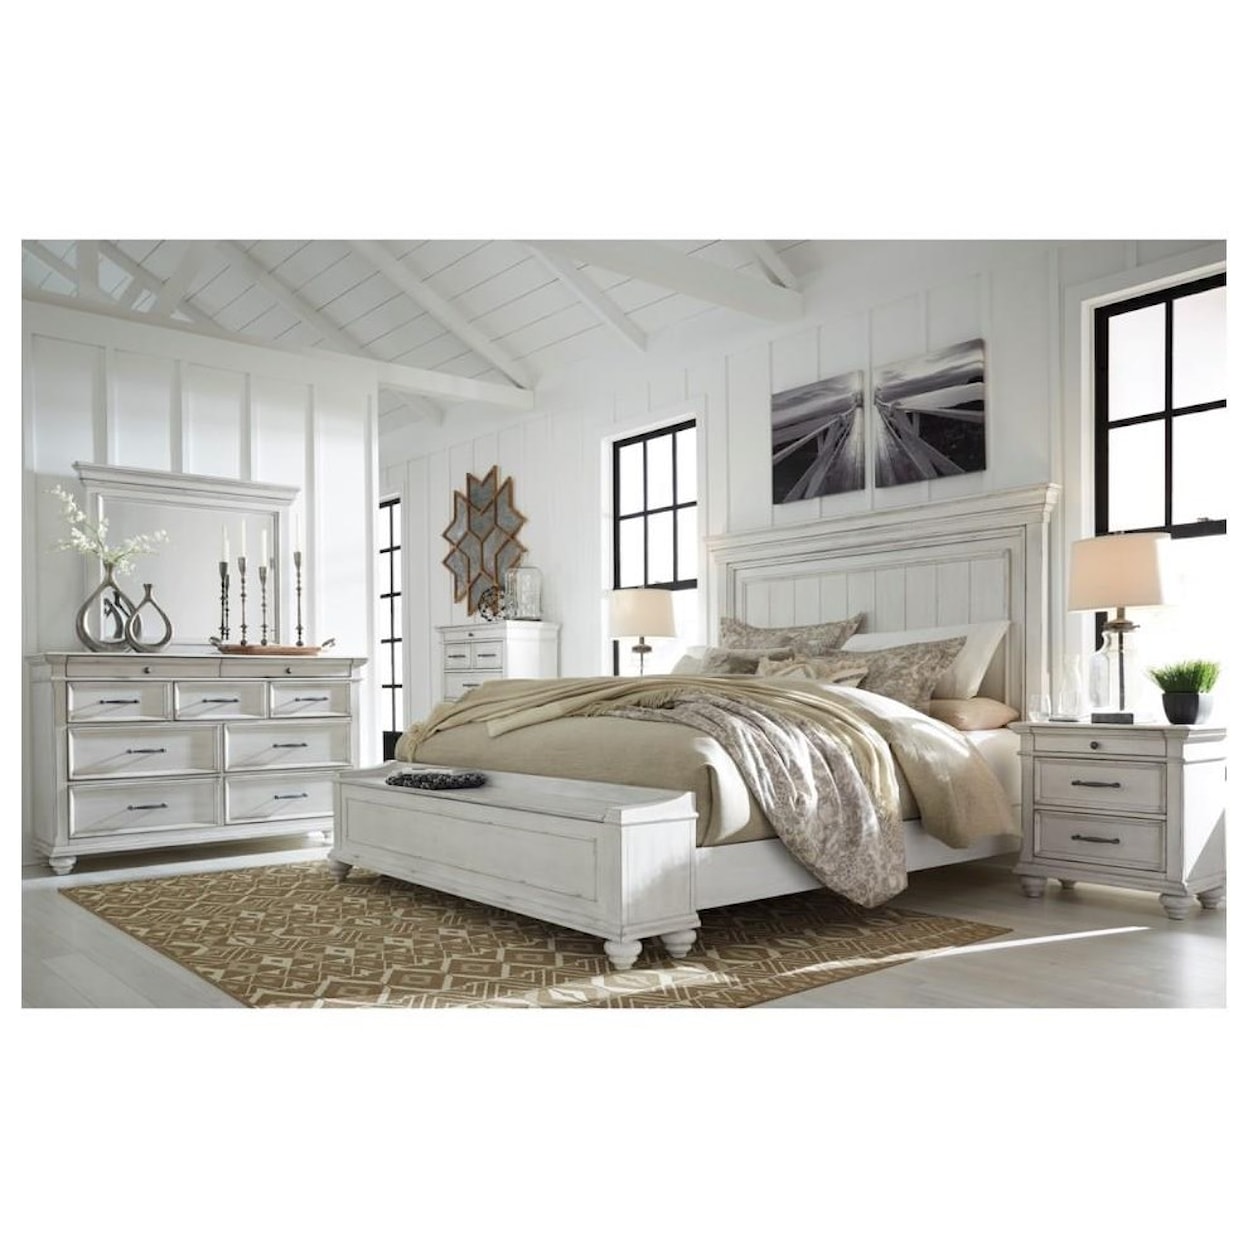 Benchcraft by Ashley Kanwyn 6 Piece Queen Bedroom Group